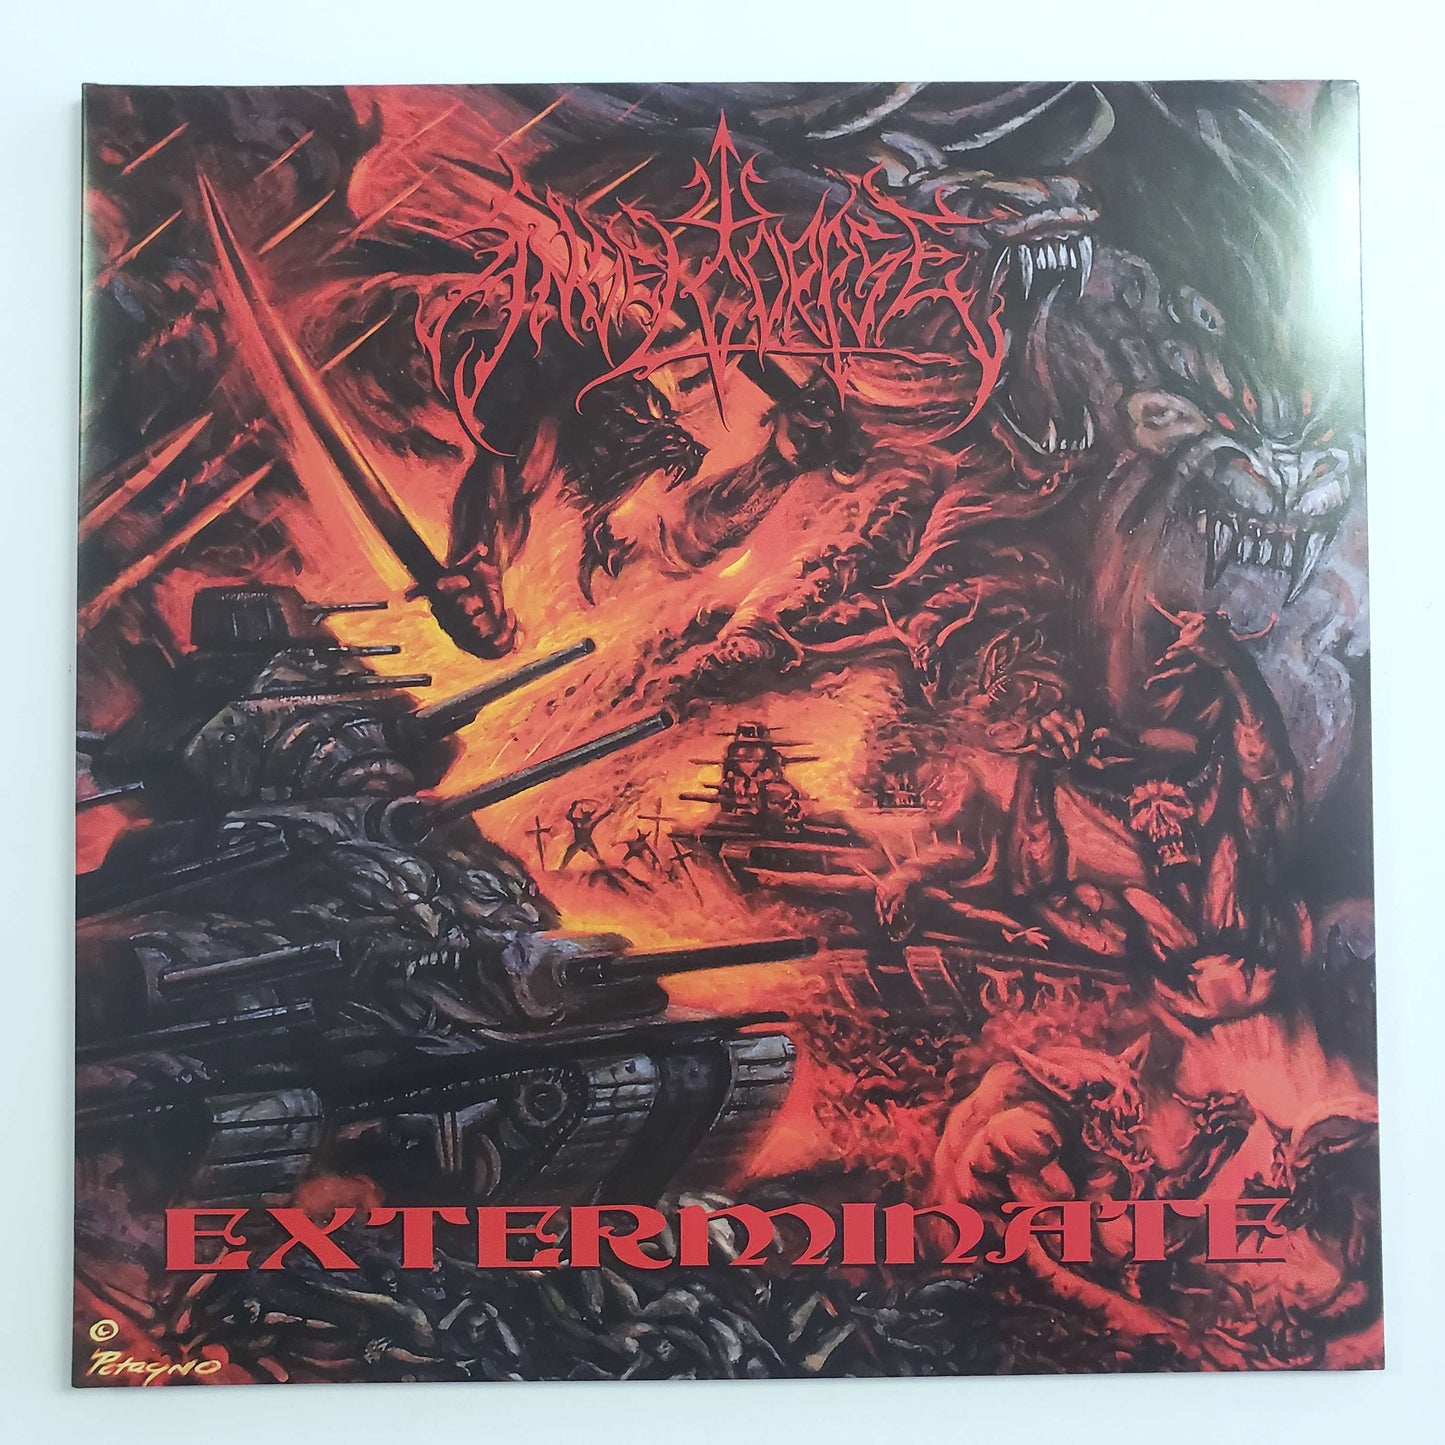 Angelcorpse - Exterminate LP (used)